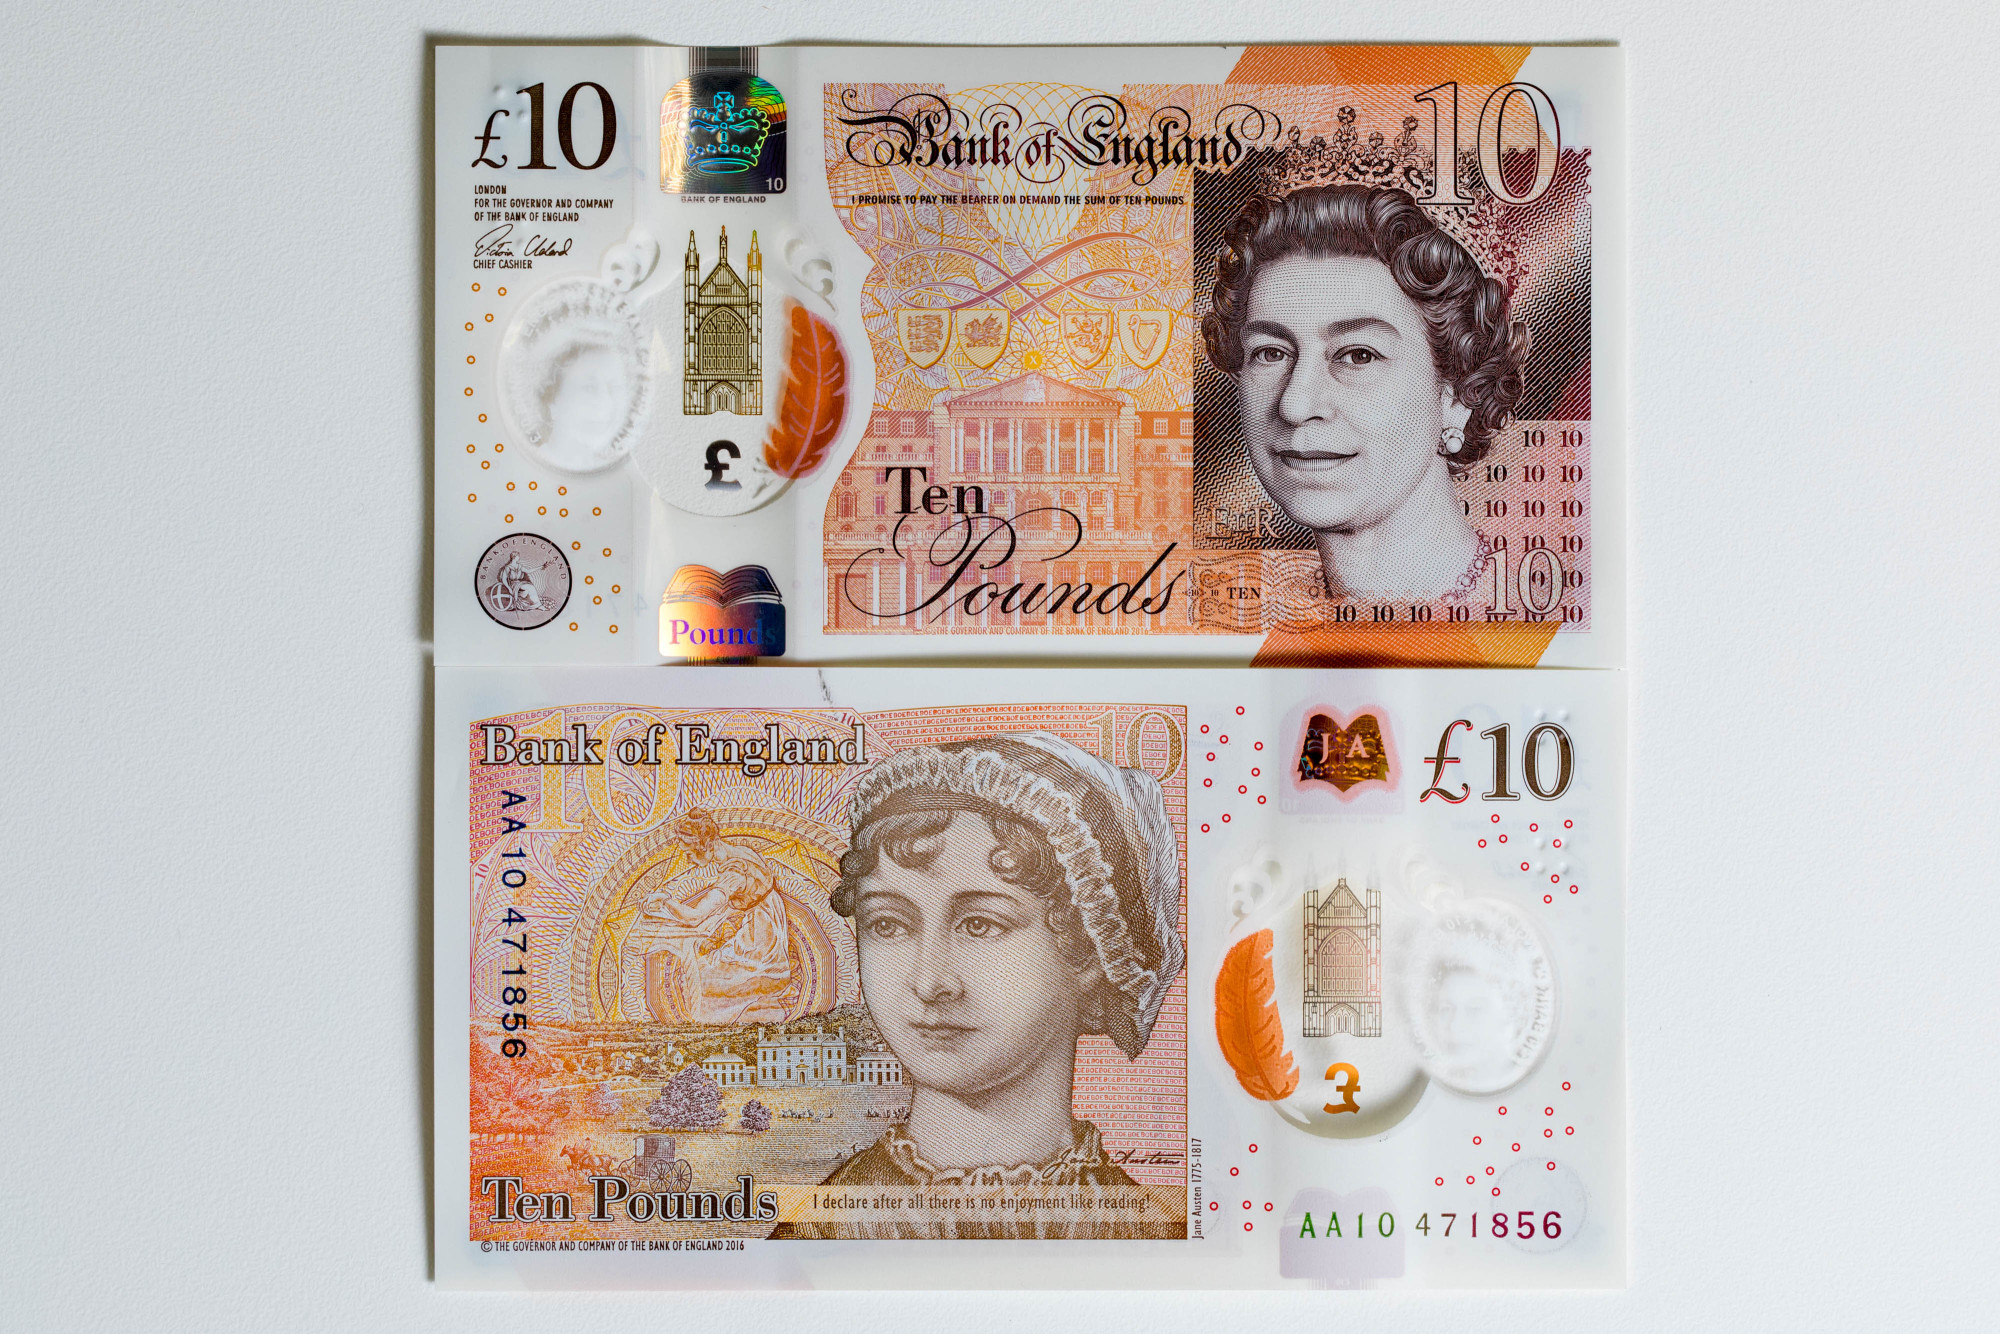 New £10 Note With Jane Austen Dares Counterfeiters to Try Bloomberg